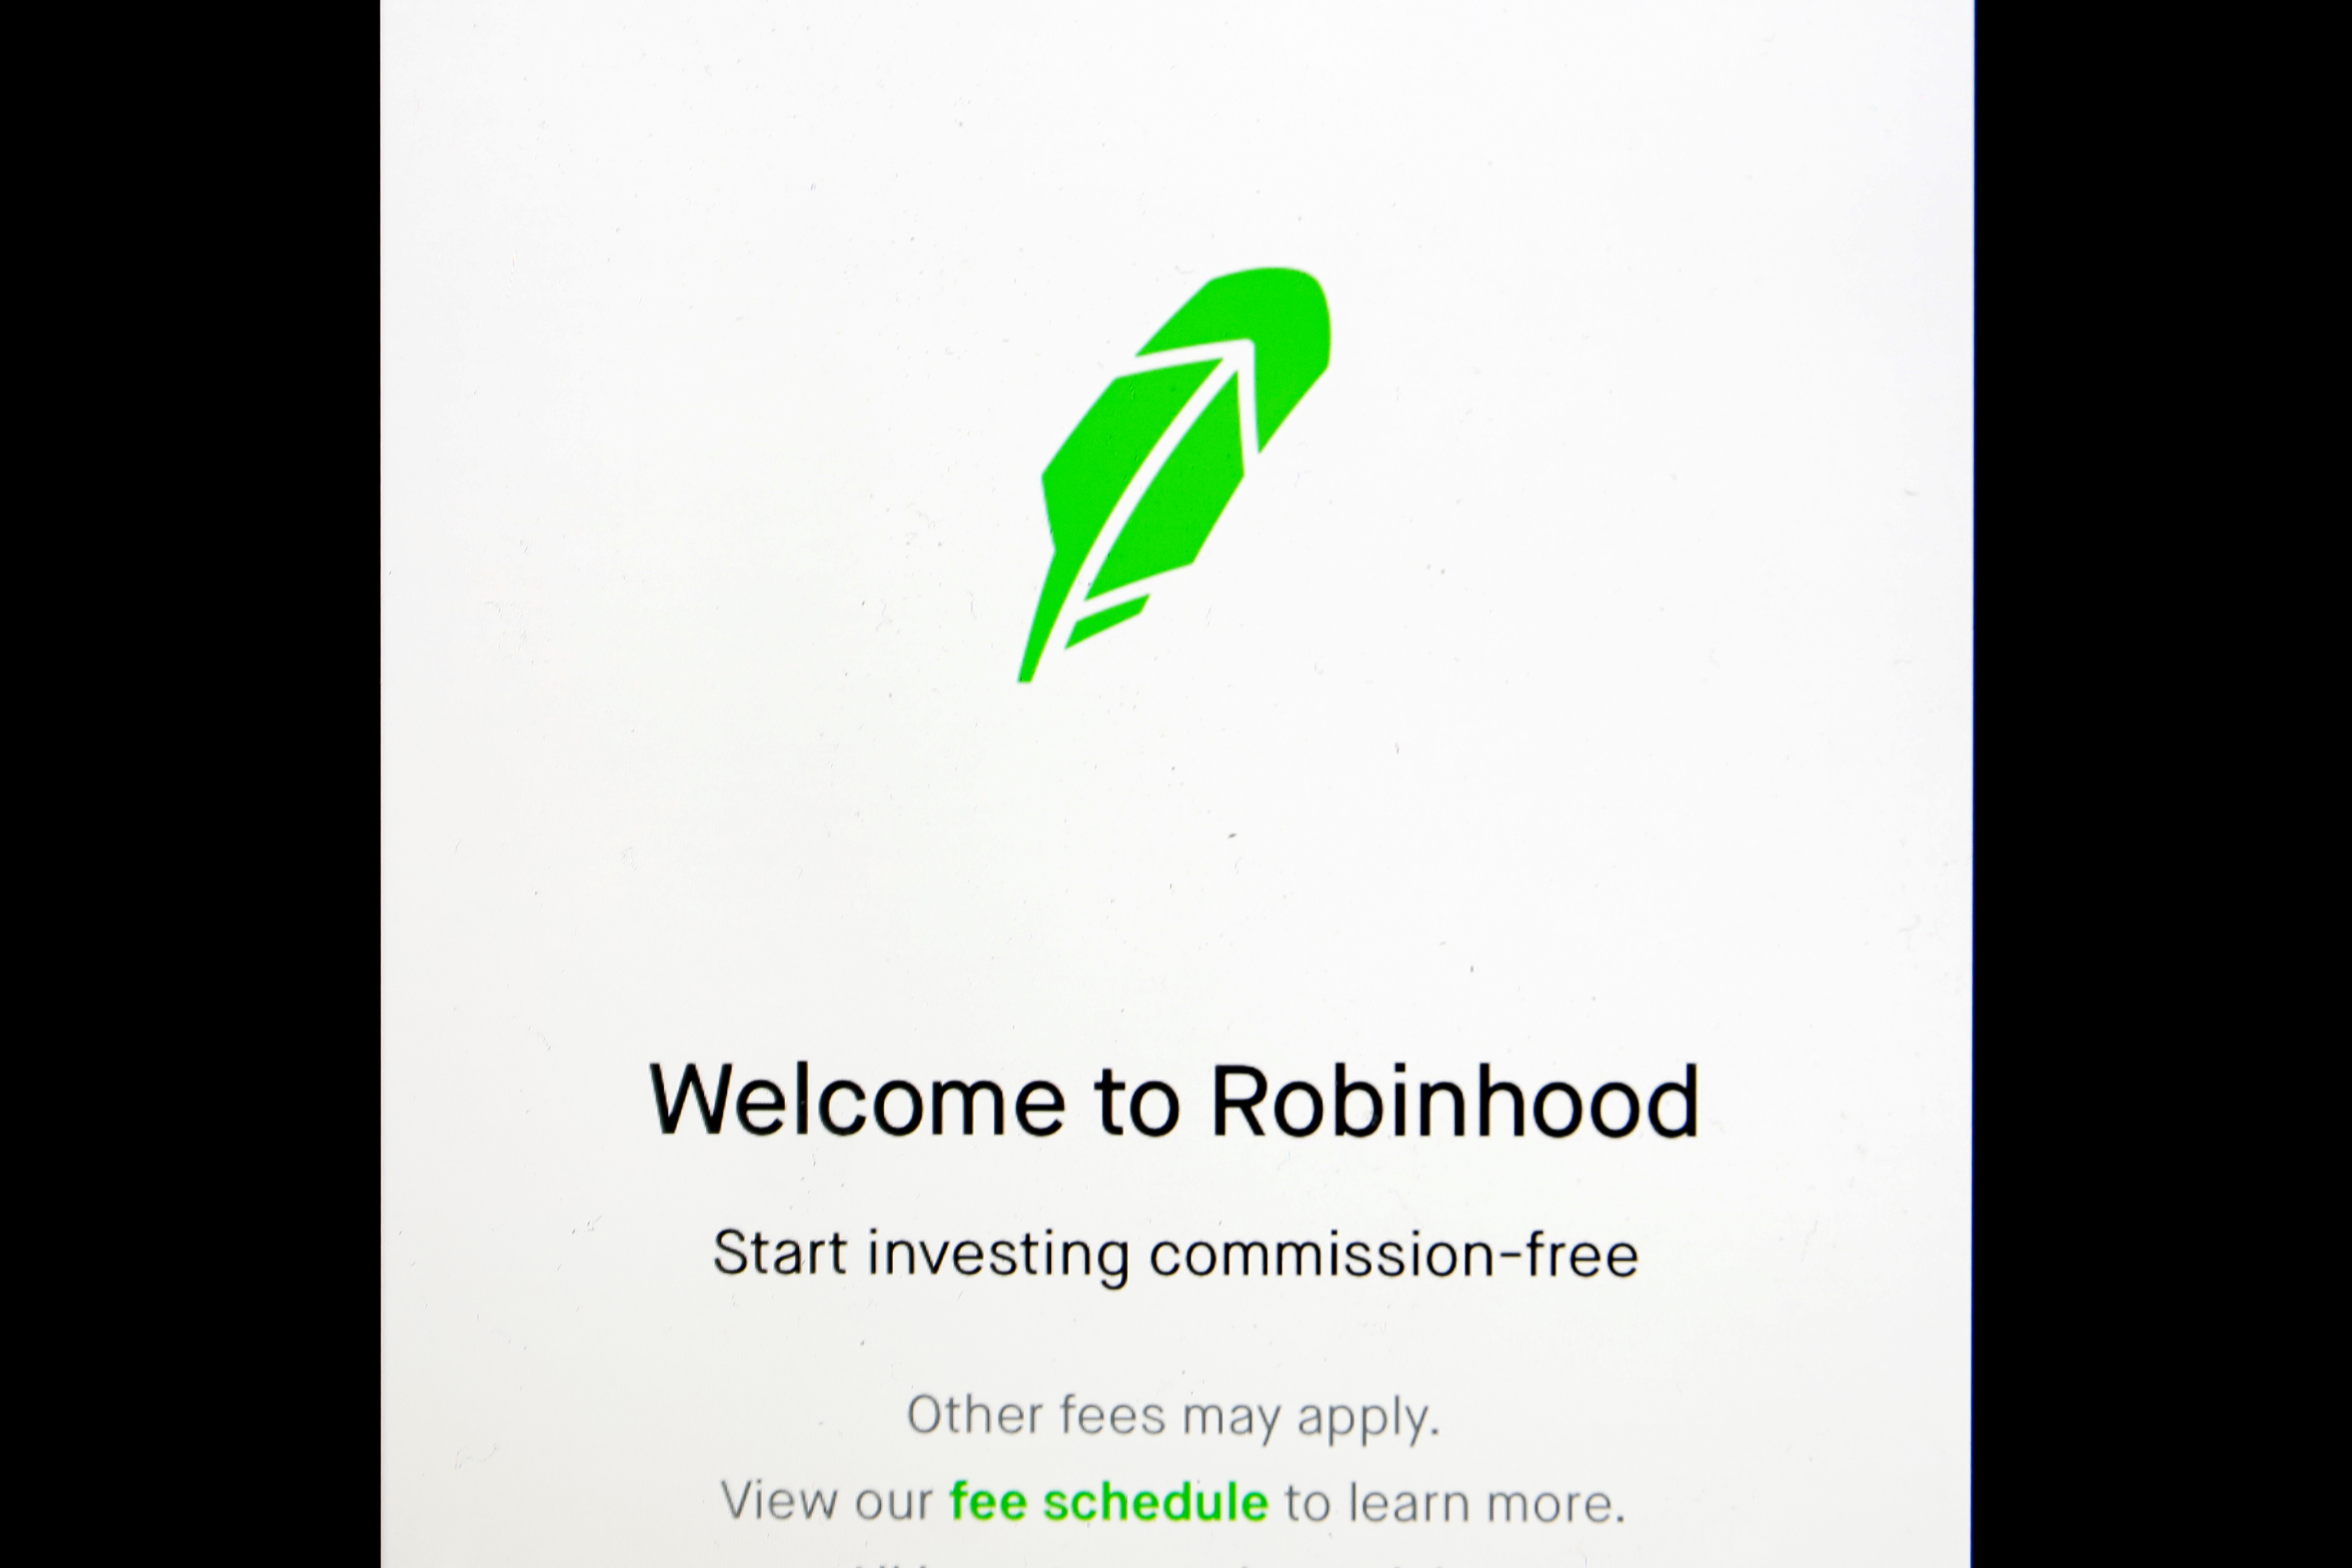 The welcome screen for the Robinhood App is displayed on a screen